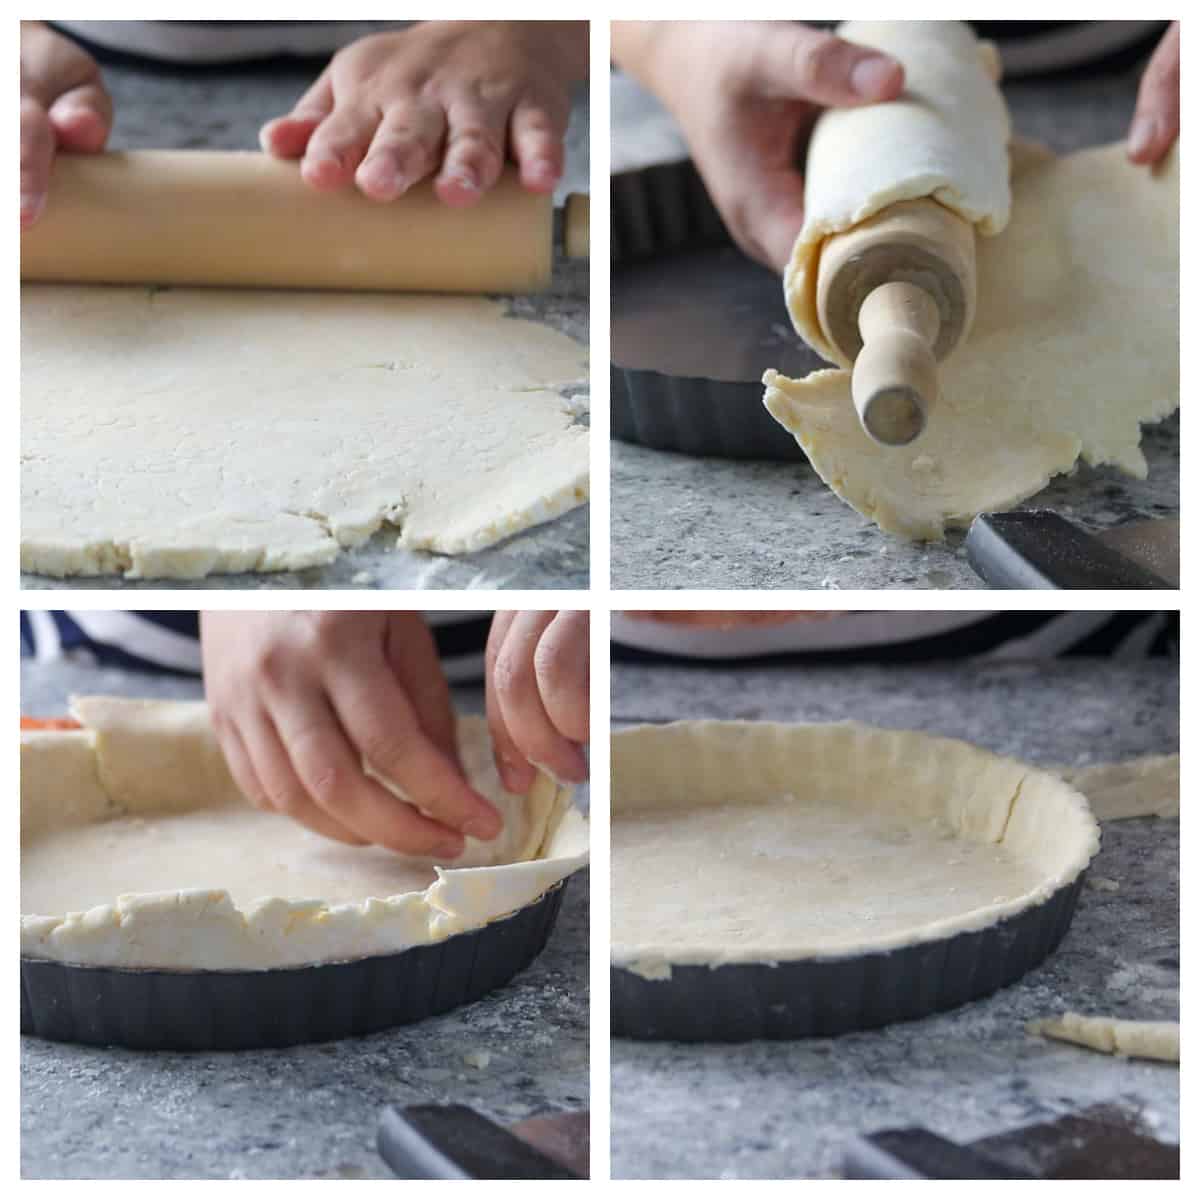 Rolling out the crust to fit it in the tart pan.